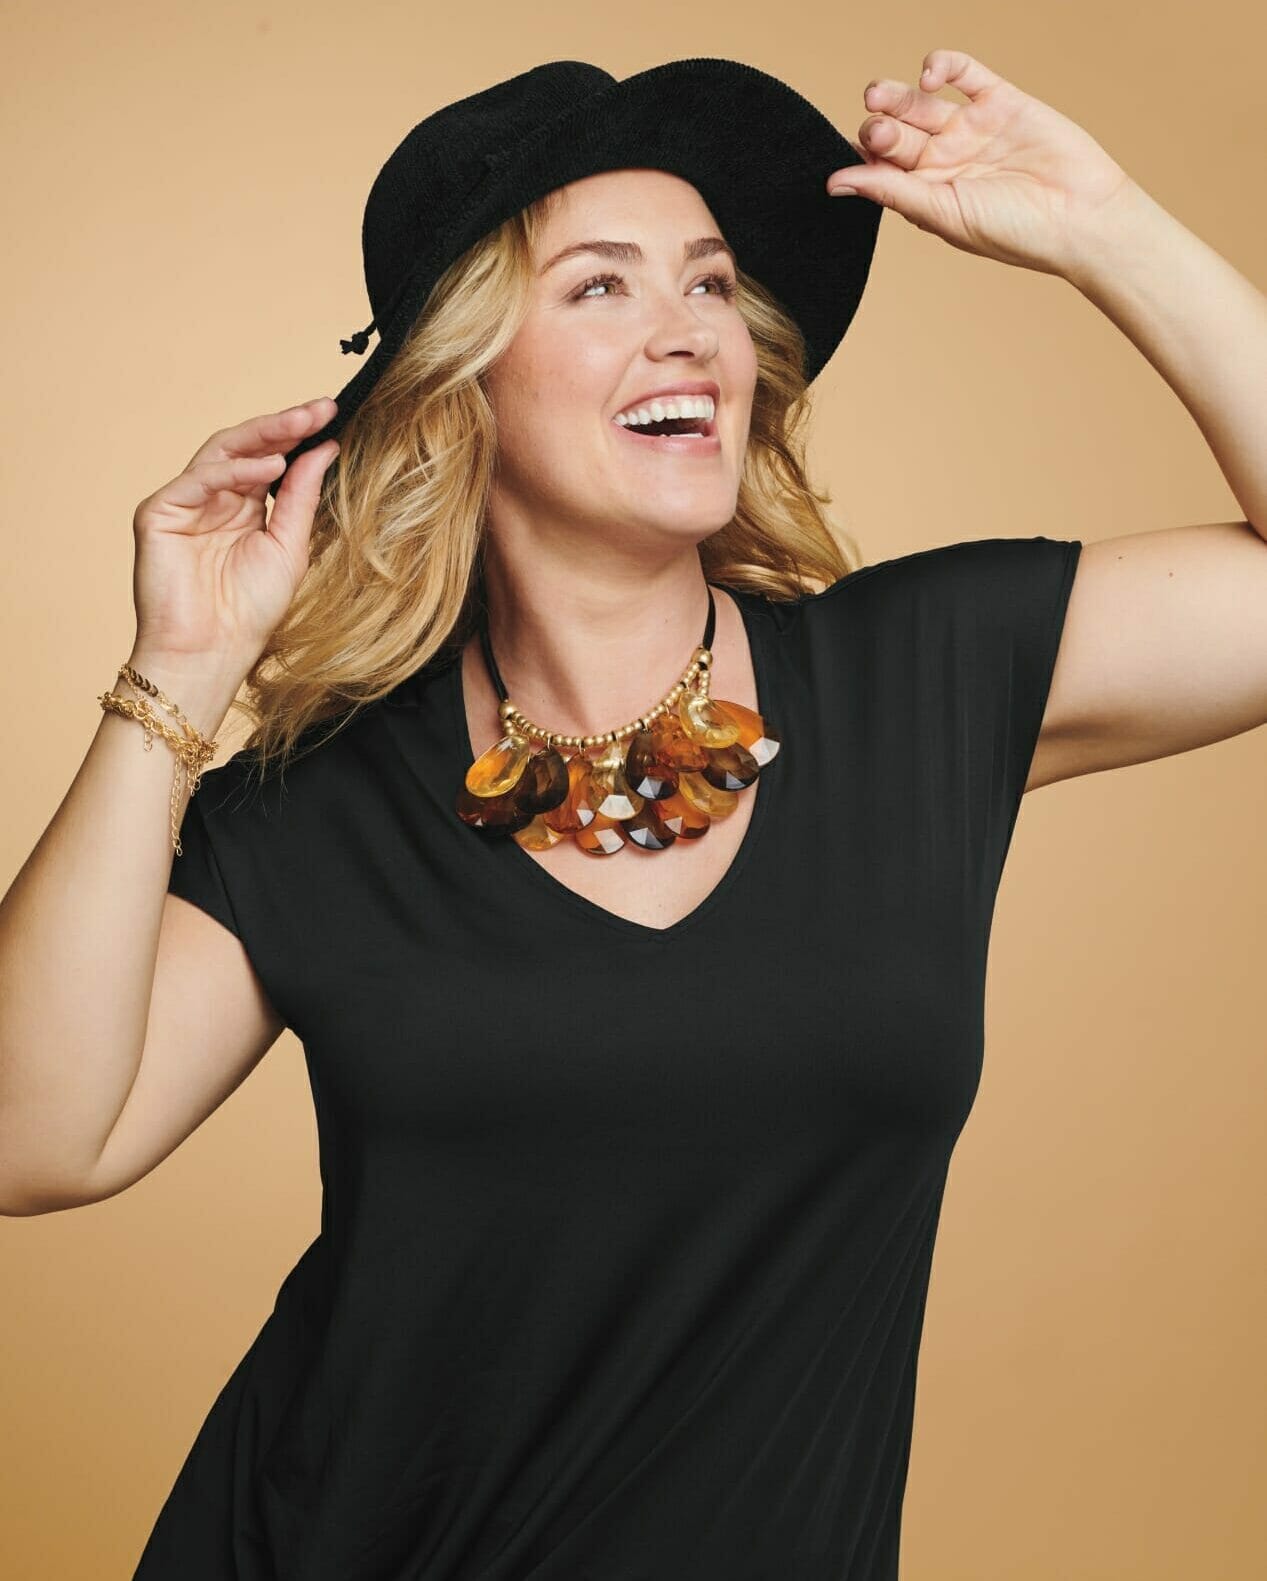 plus size model wearing a black t-shirt with a black hat and a layered teardrop necklace.